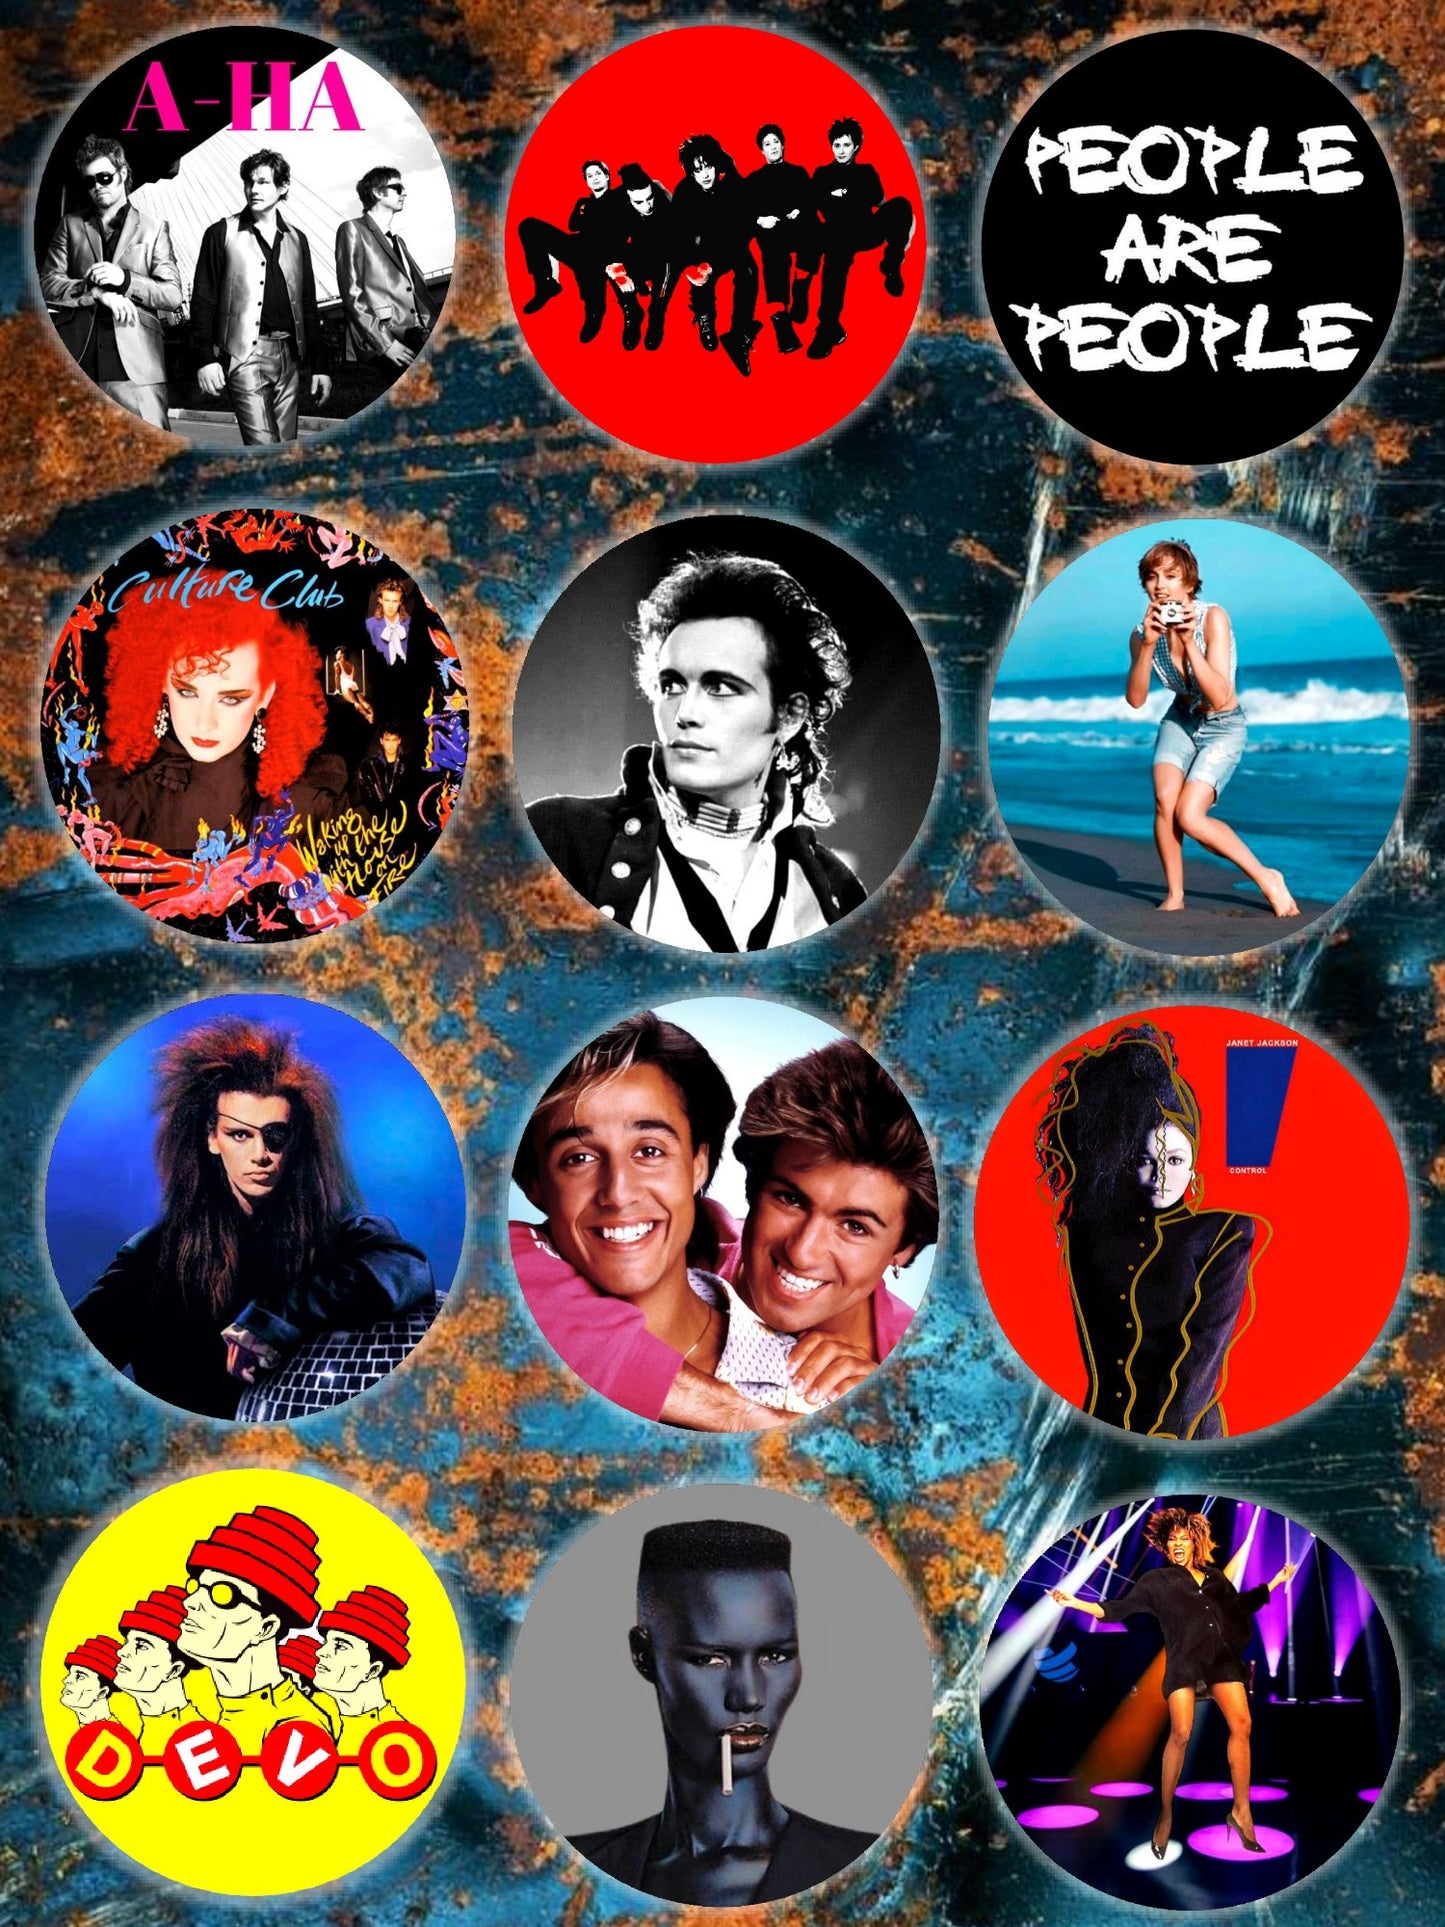 Custom Handmade I love 80s Pop Music Button Pin Set For Sale In AREA51GALLERY New Orleans